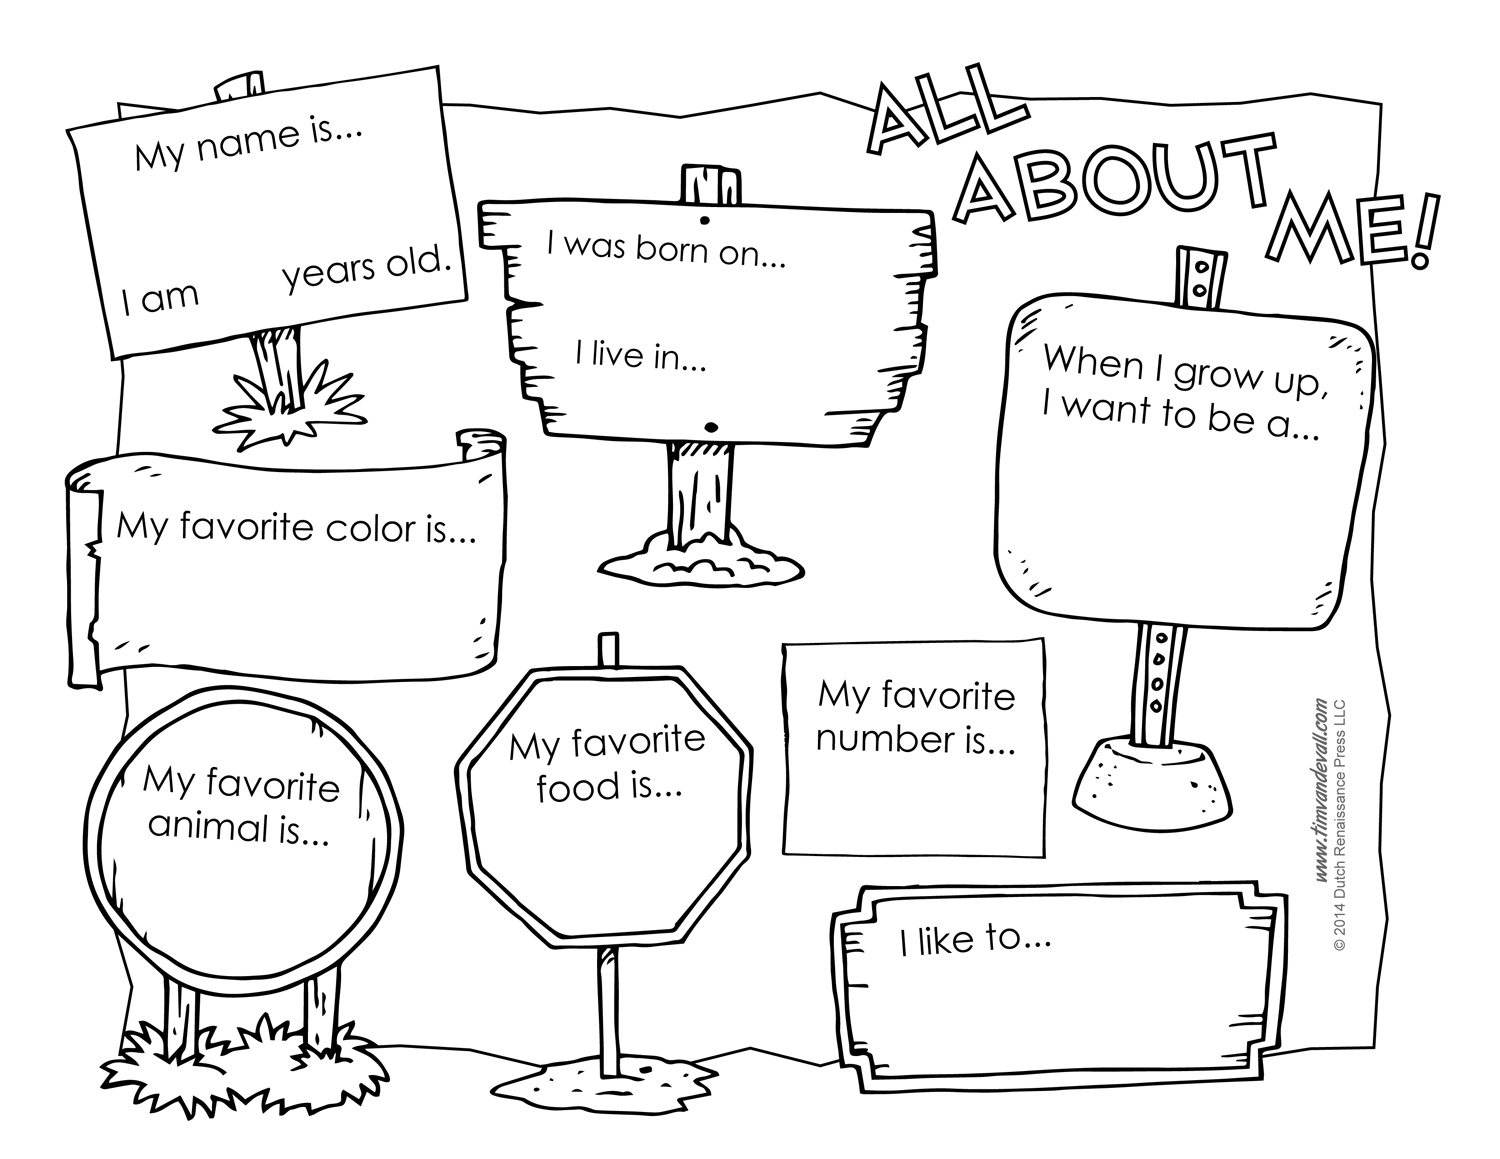 All about me coloring pages to download and print for free